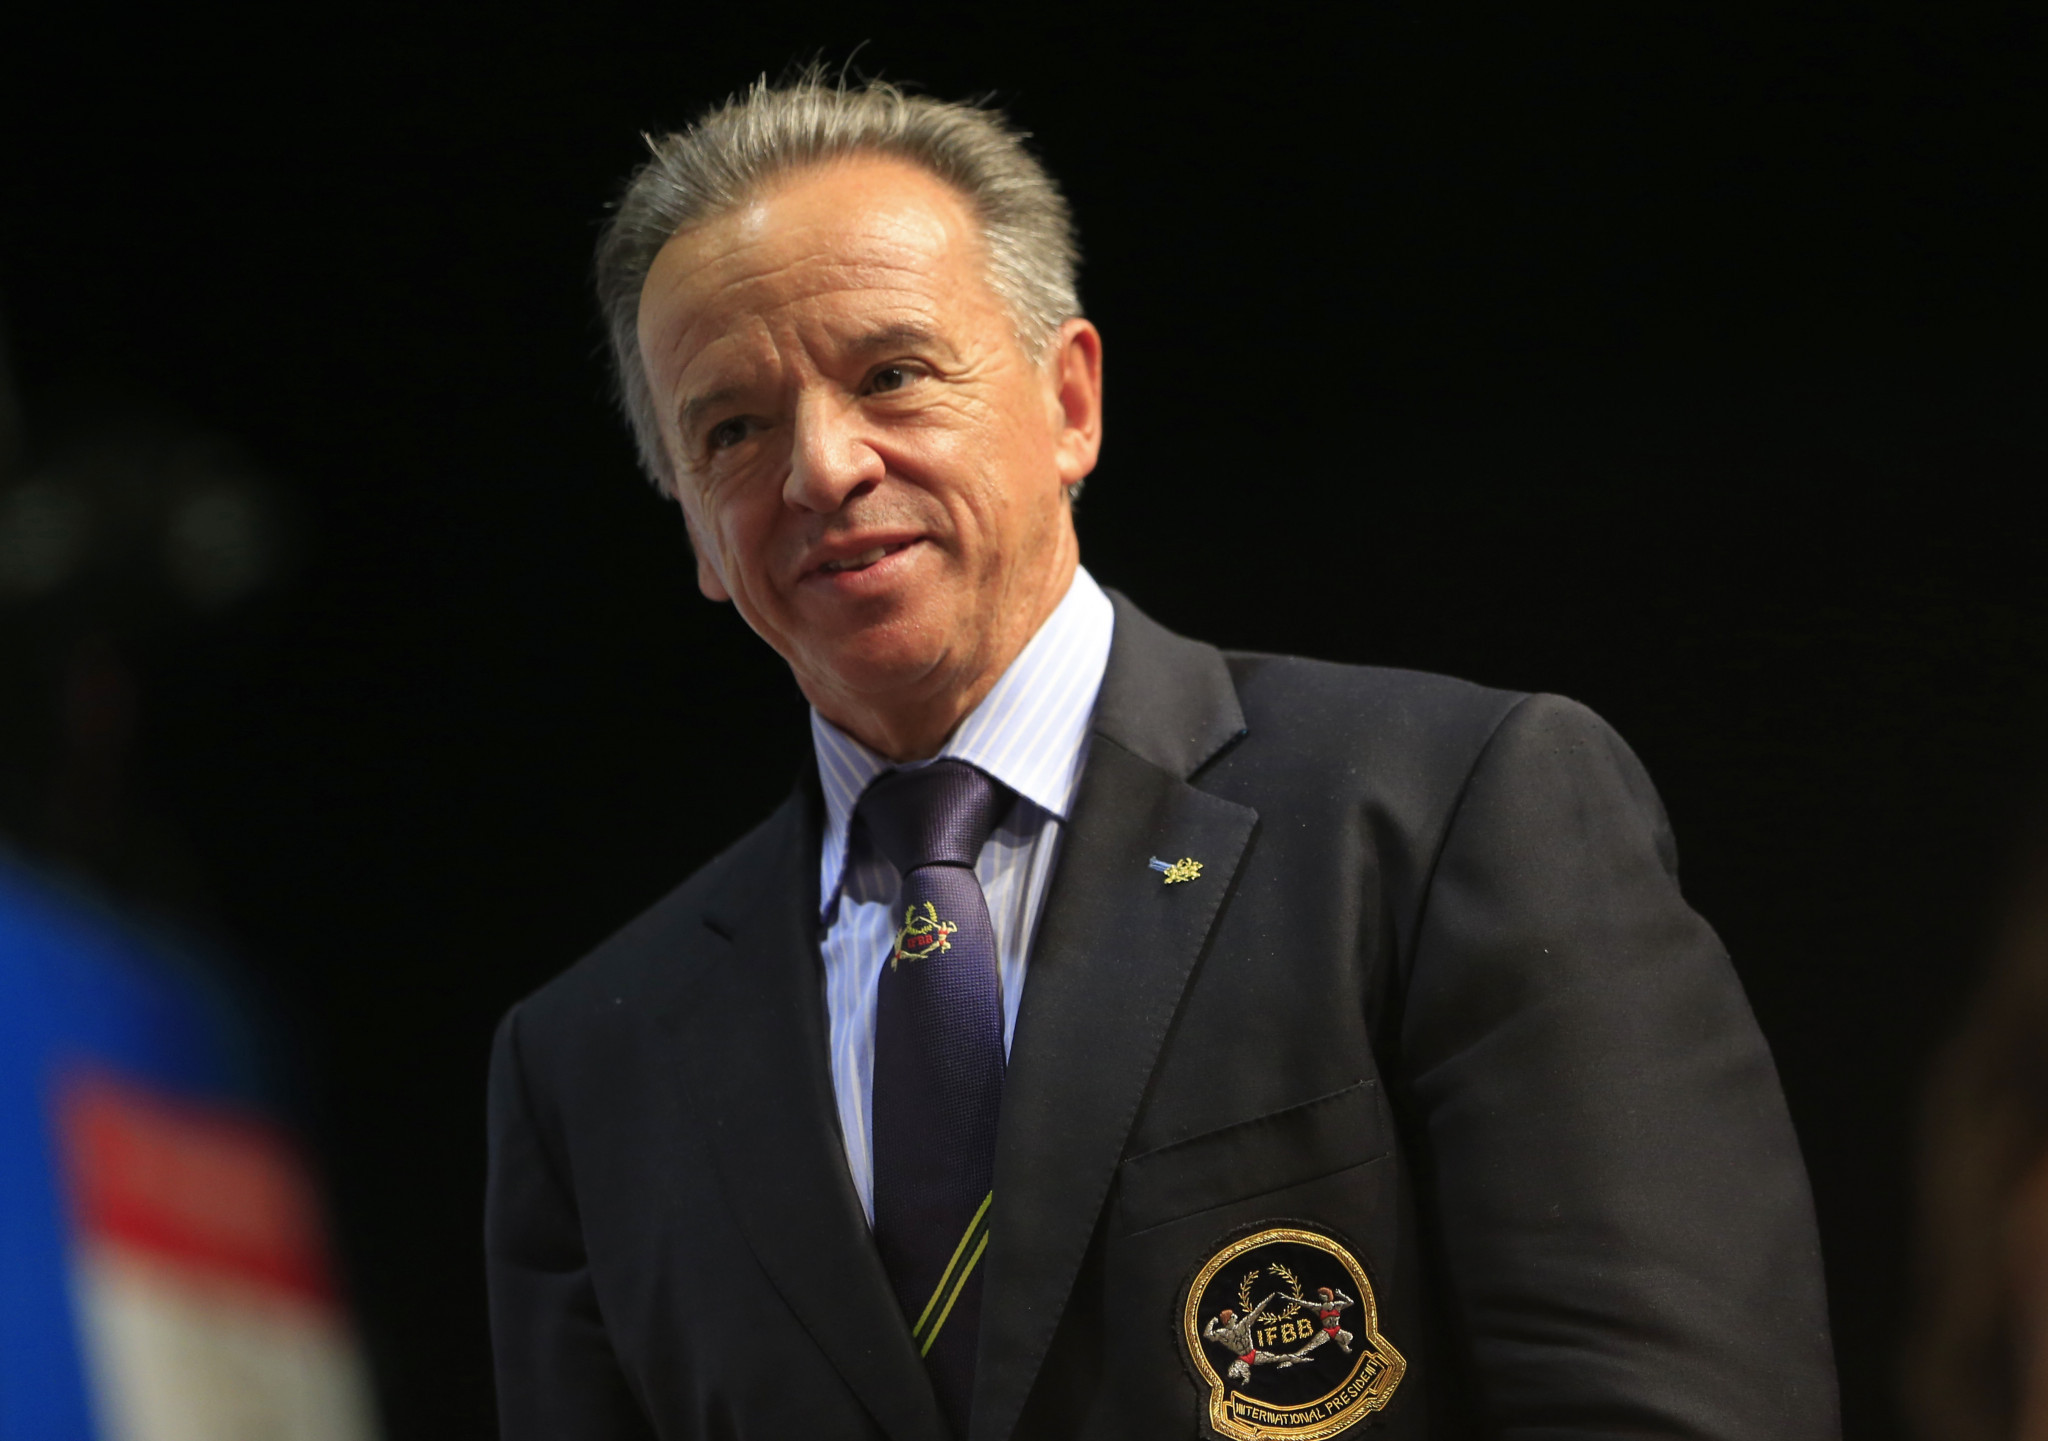 IFBB President Santonja to make case for inclusion at CAC Games 